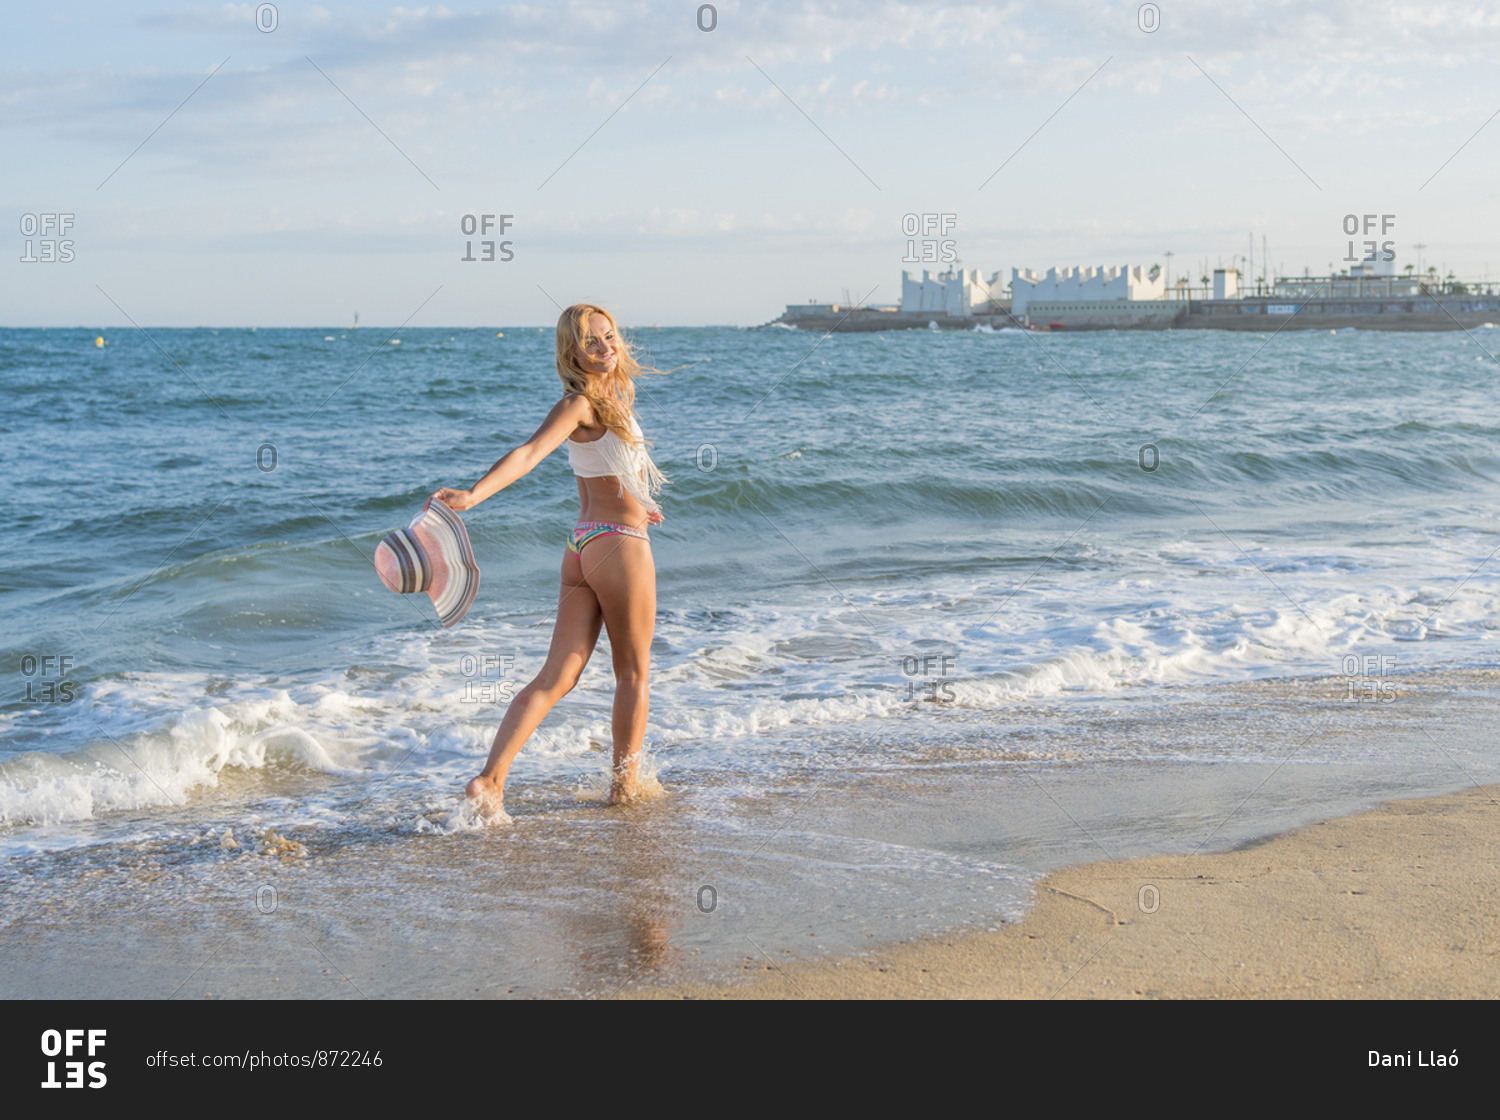 Russian woman smiling as she waves her hat on the shore of the beach